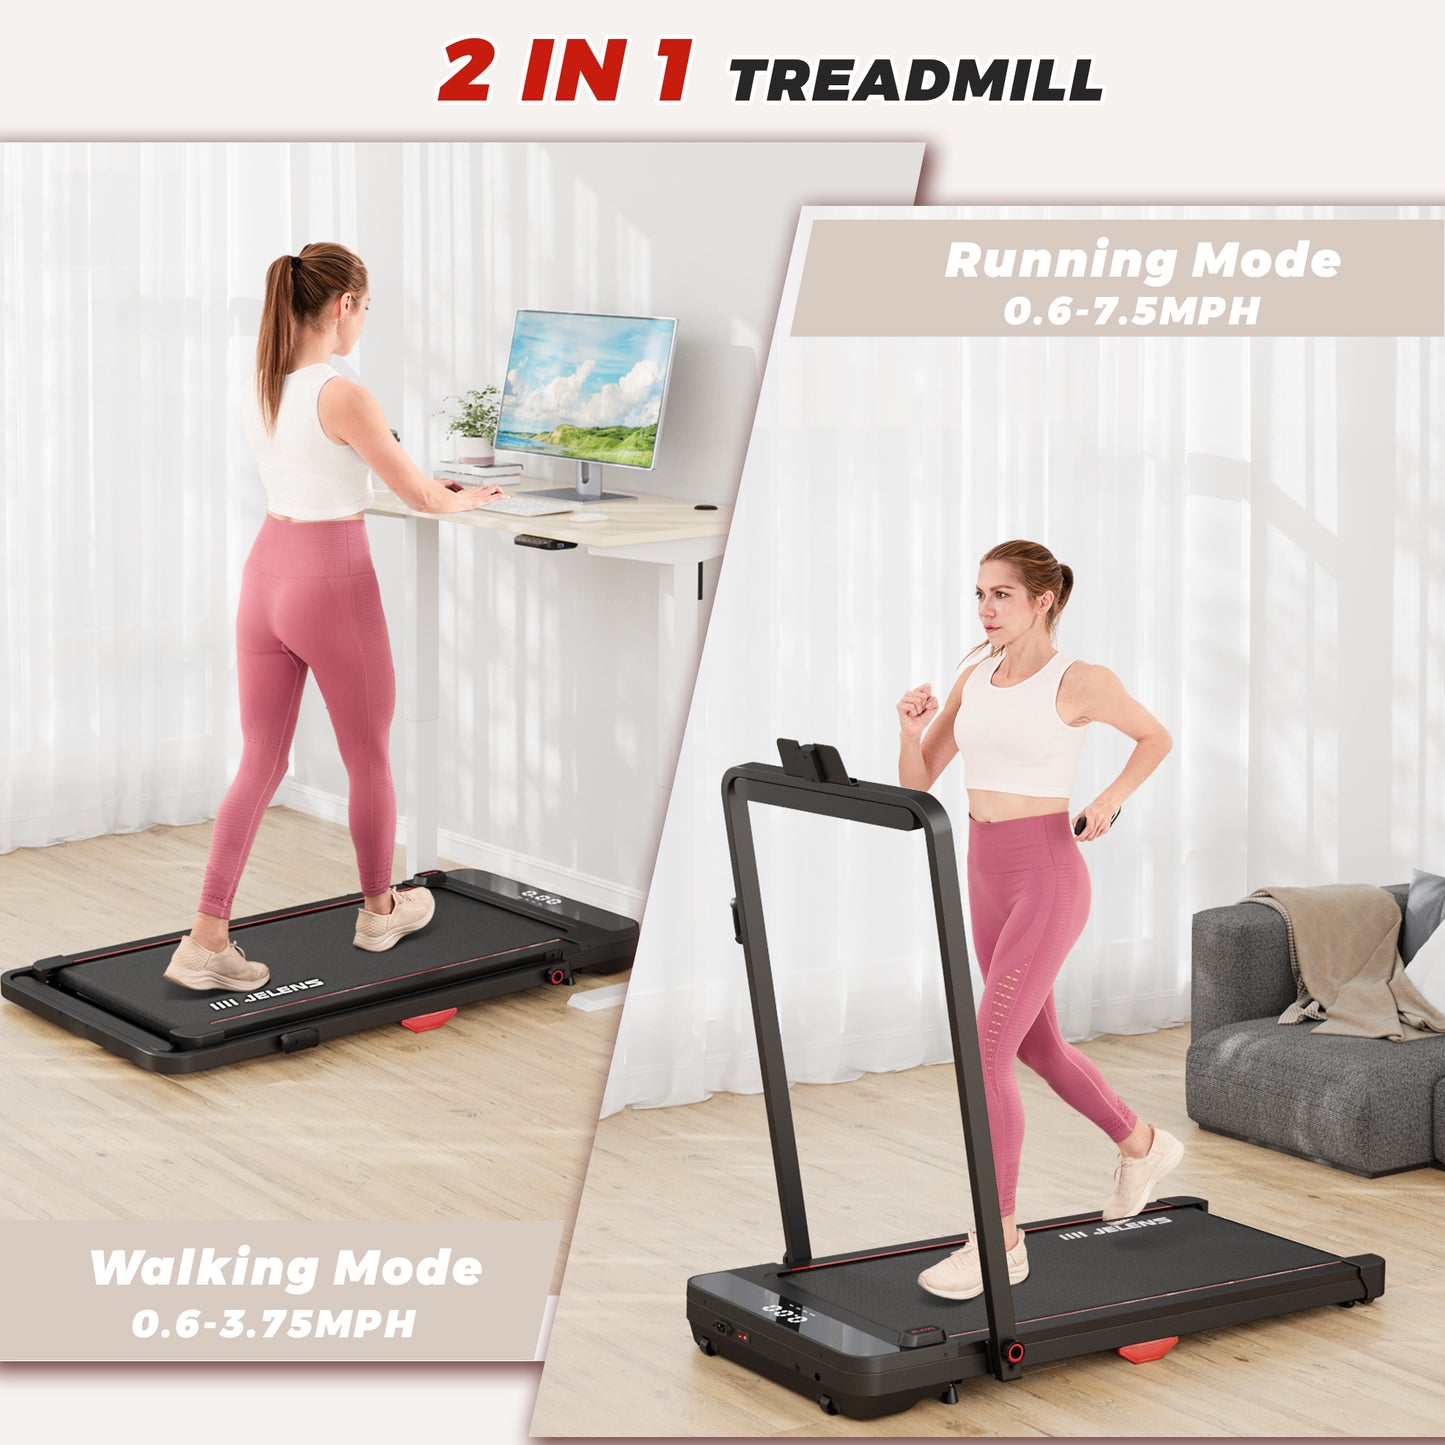 JELENS 2 in 1 Treadmill, Walking Pad, 2.5HP Folding Treadmill with Remote Control LED Display, Portable Treadmill for Home/Office with 265lbs Weight Capacity